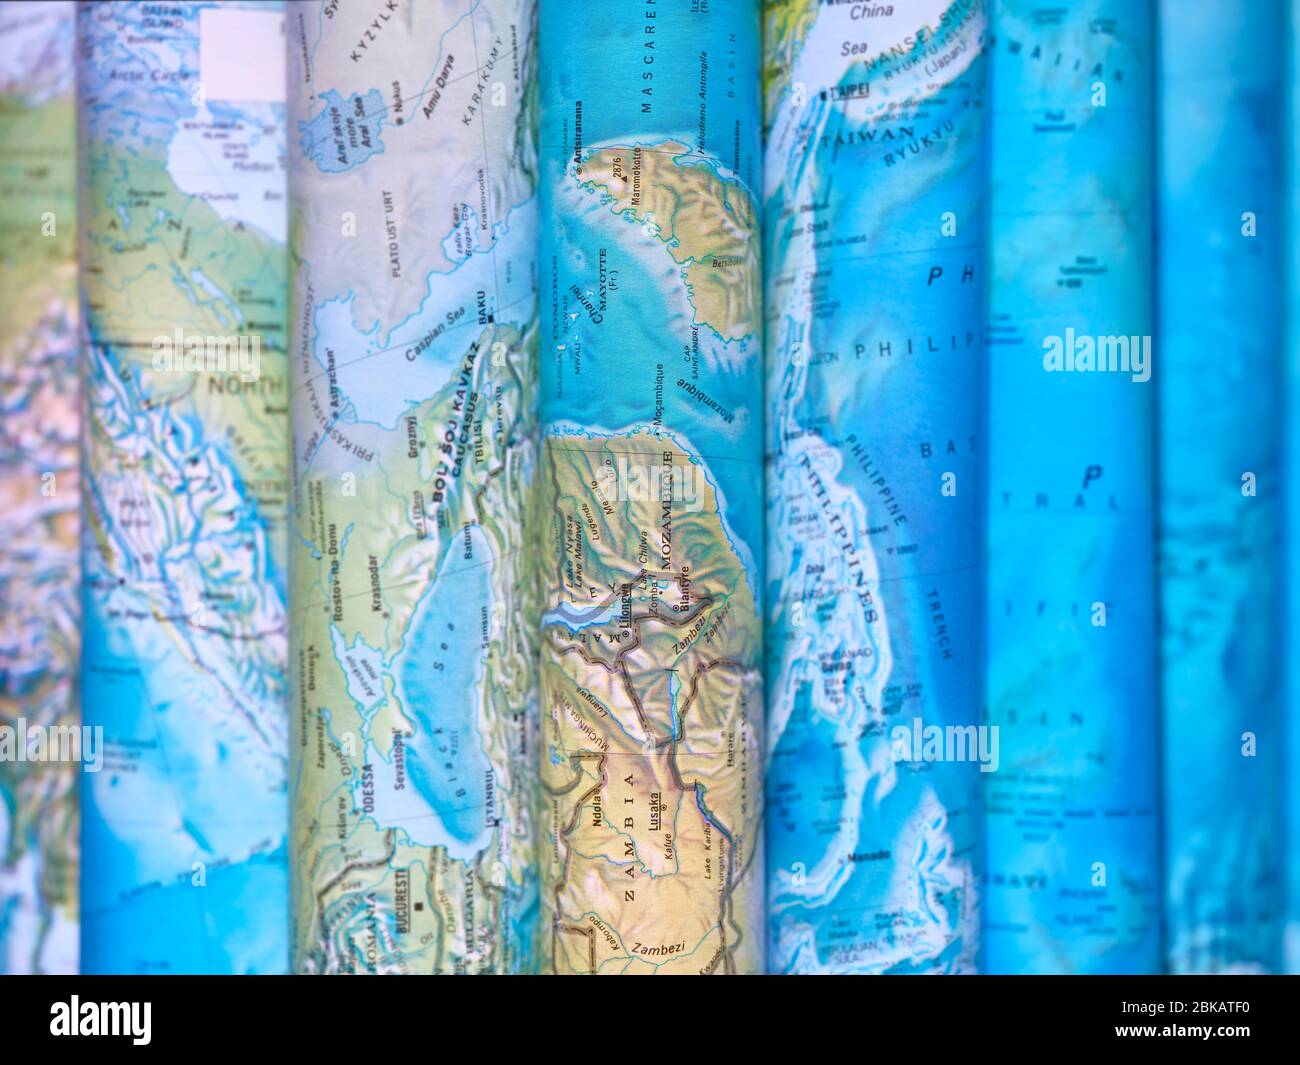 Atlas showing maps with pages folded over artistically Stock Photo